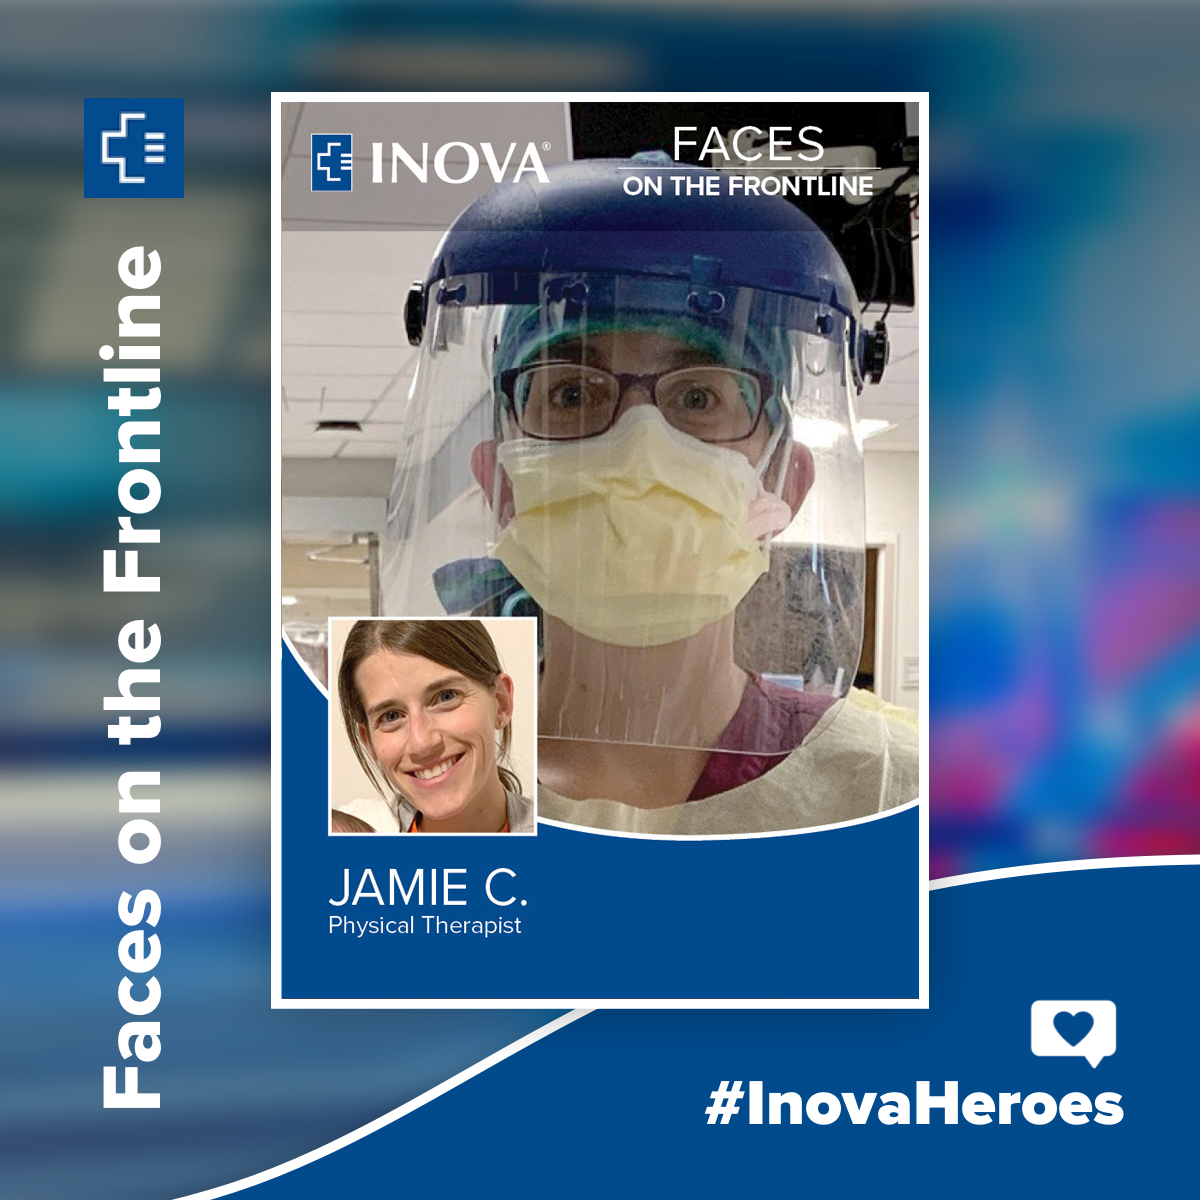 Our #InovaHero Jamie is a Physical Therapist at Inova Loudoun Hospital. She’s most proud of helping patients regain strength, and she's a mom who loves playing with her kids. Read more about Jamie and Inova’s #FacesOnTheFrontline: bit.ly/InovaFaces_TW